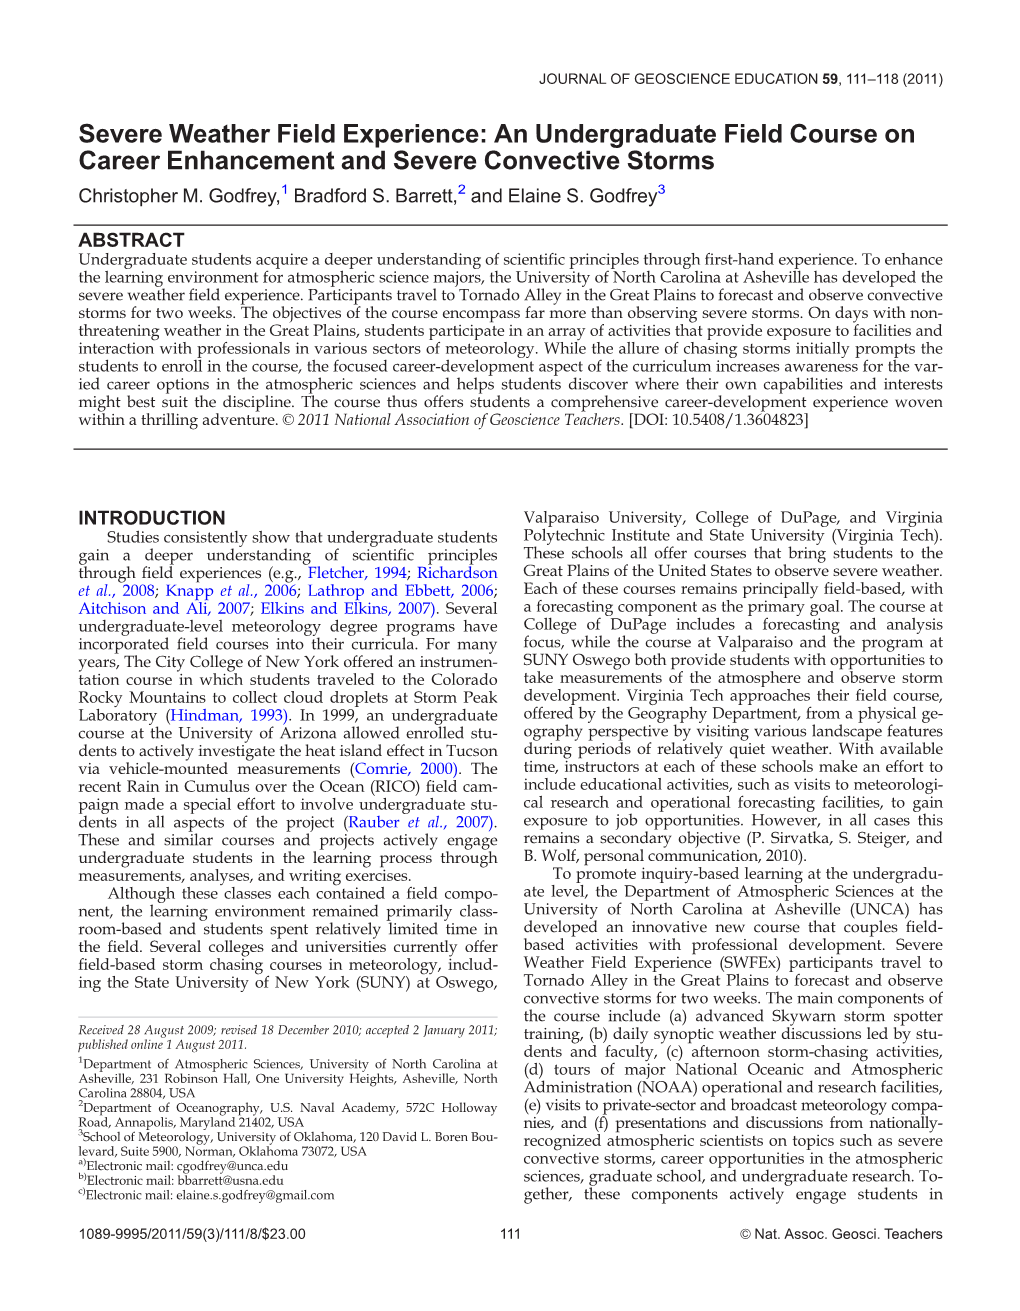 An Undergraduate Field Course on Career Enhancement and Severe Convective Storms Christopher M